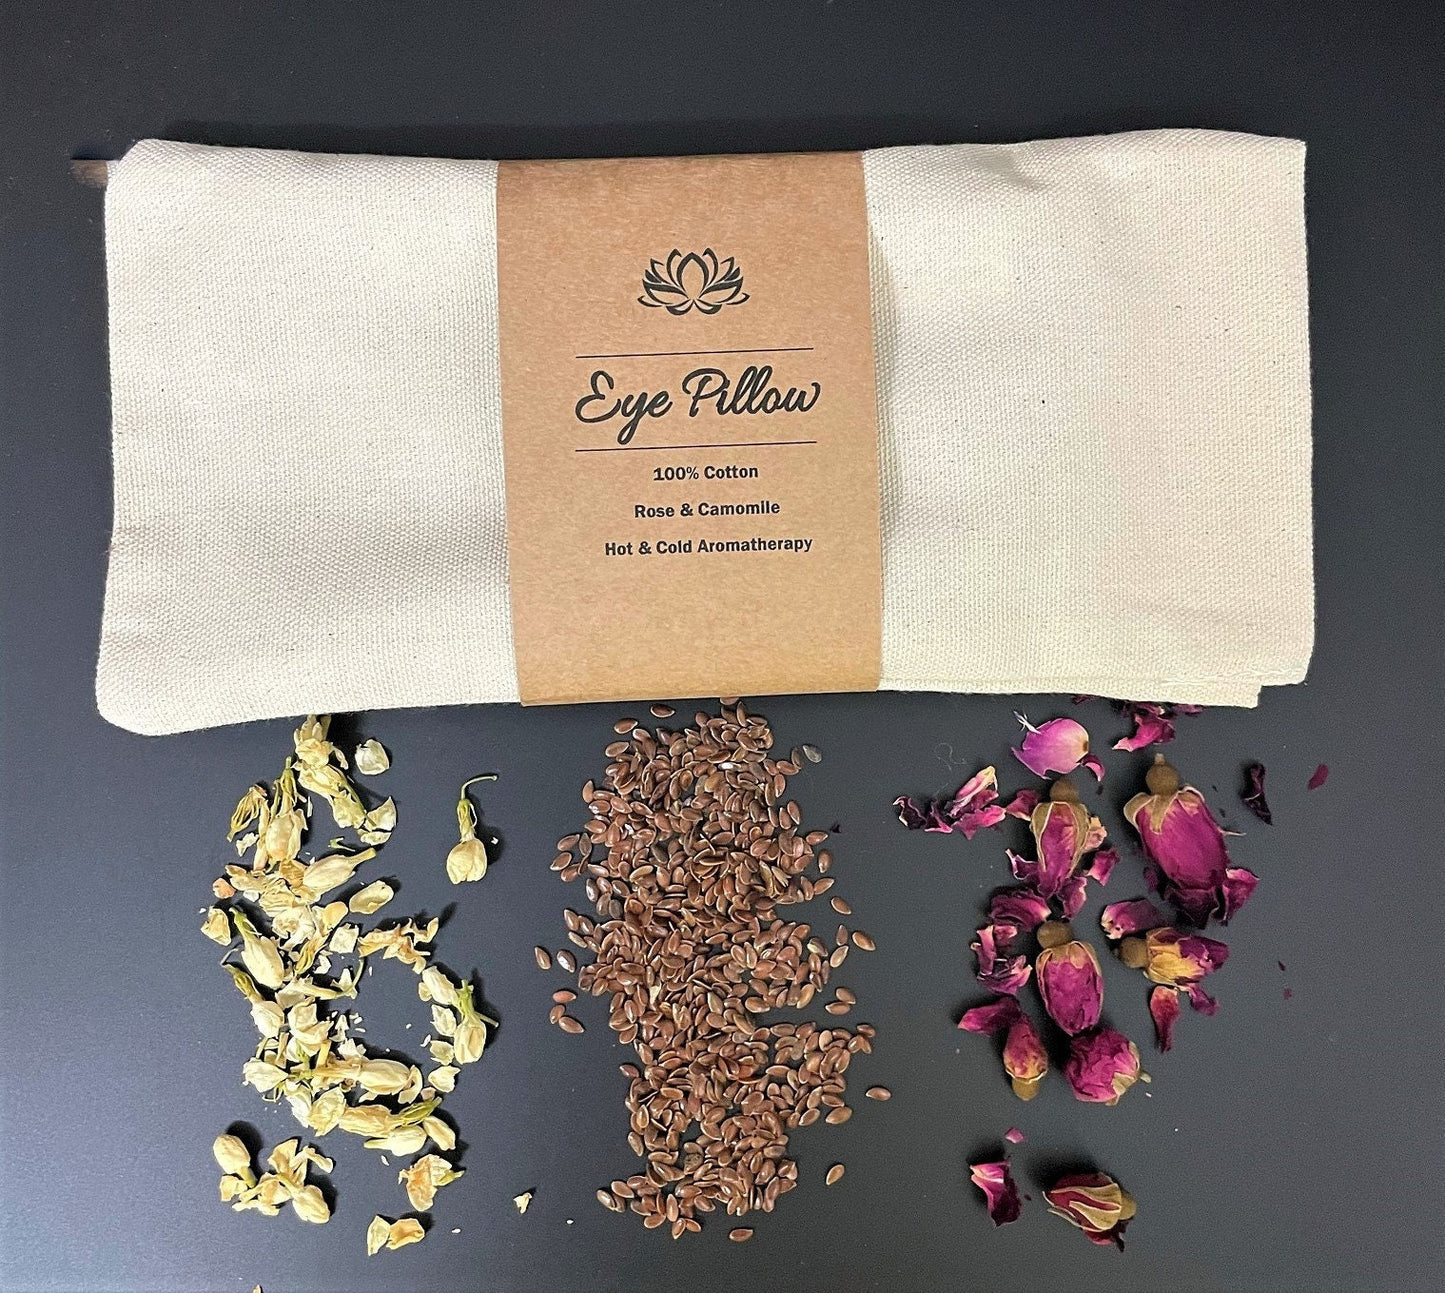 Aromatherapy Hot & Cold Lavender or Rose and Chamomile Eye Pillows,100% Cotton, Natural Lavender, Organic Flax Seed, Yoga Eye Pillow, Relax